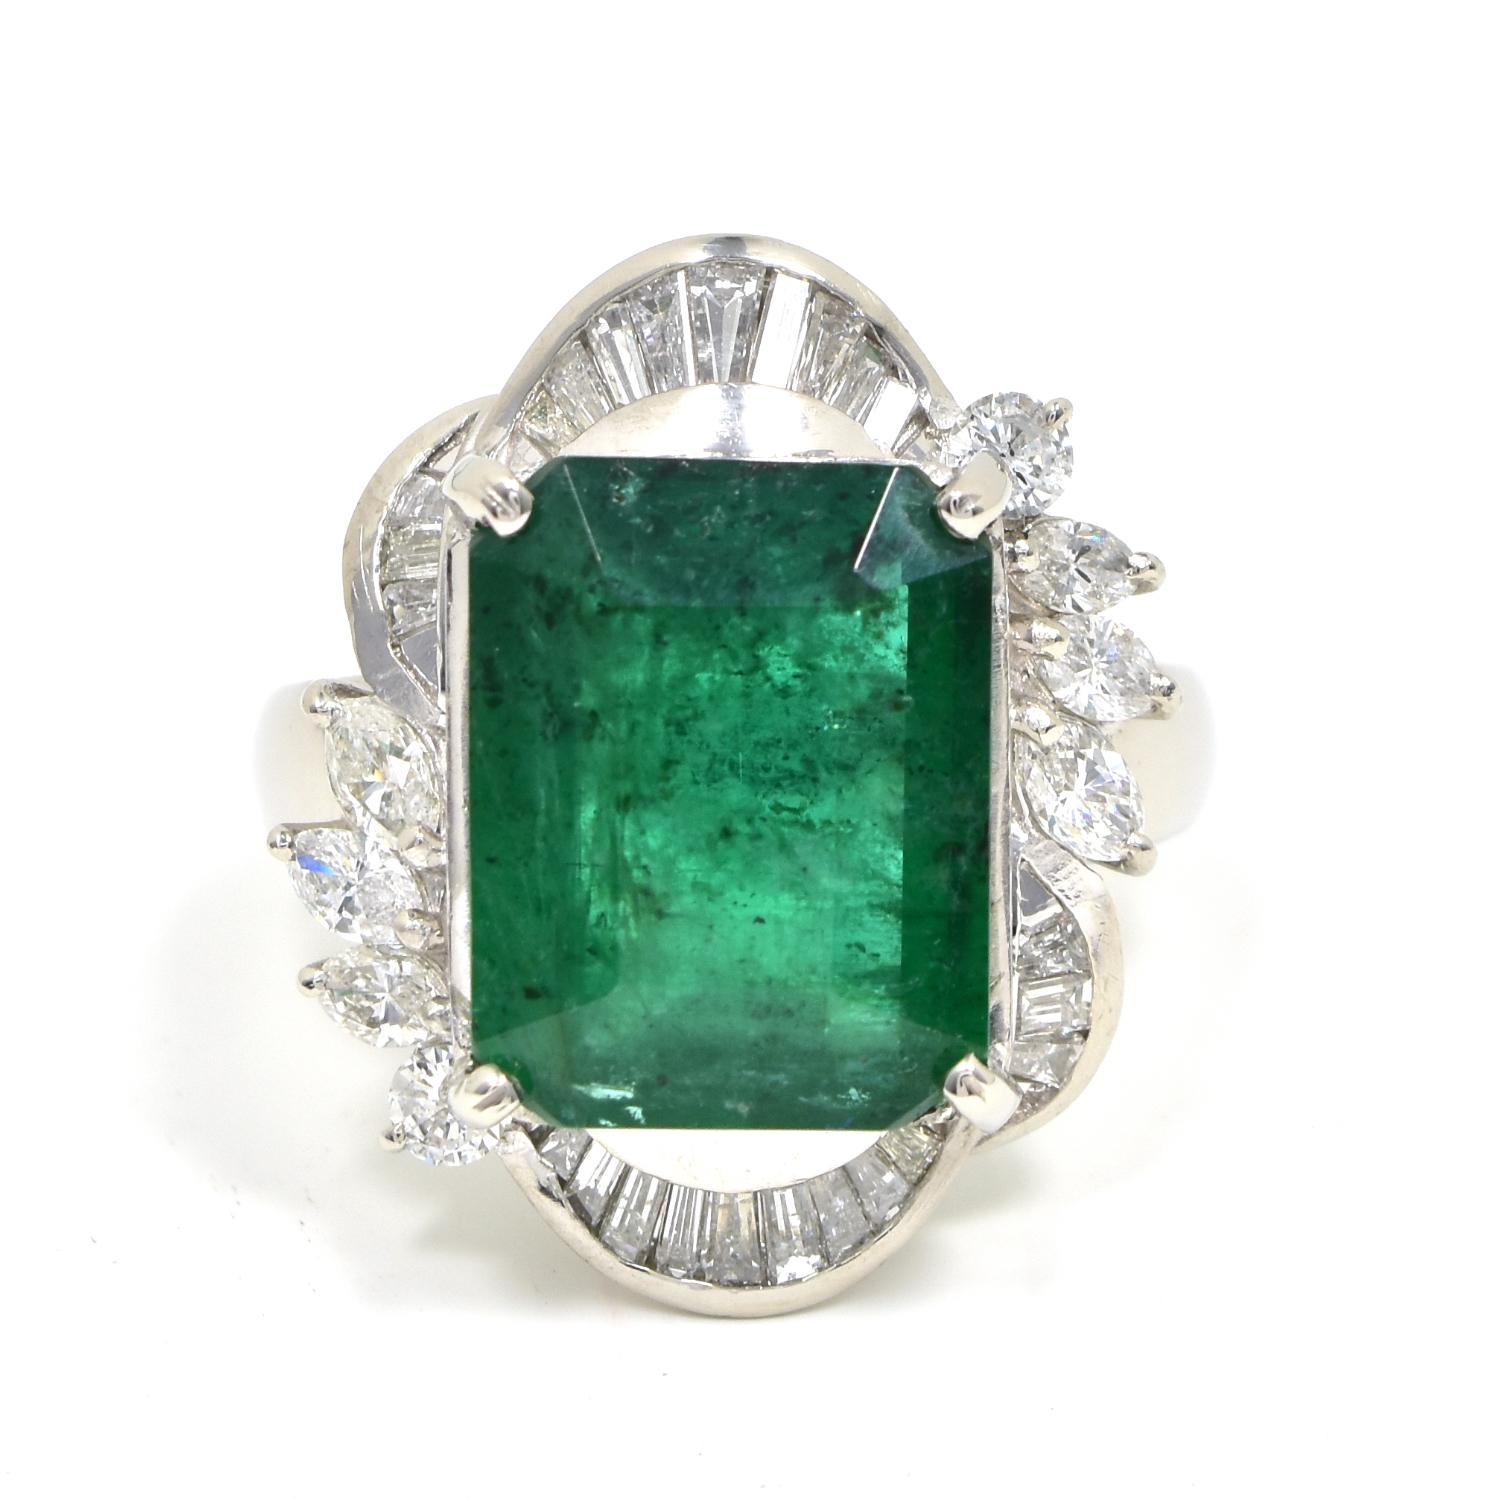 Style: Engagement/Cocktail Ring

Material: Platinum 

Main Stone: Emerald

Main Stone size: Approx. 8 ctw

Additional stones:  Diamonds

Additional stones carats: Approx. 2.5 ctw

Total Item Weight (g): 13.9 grams

​​​Ring Size:  6.5

Includes: 24